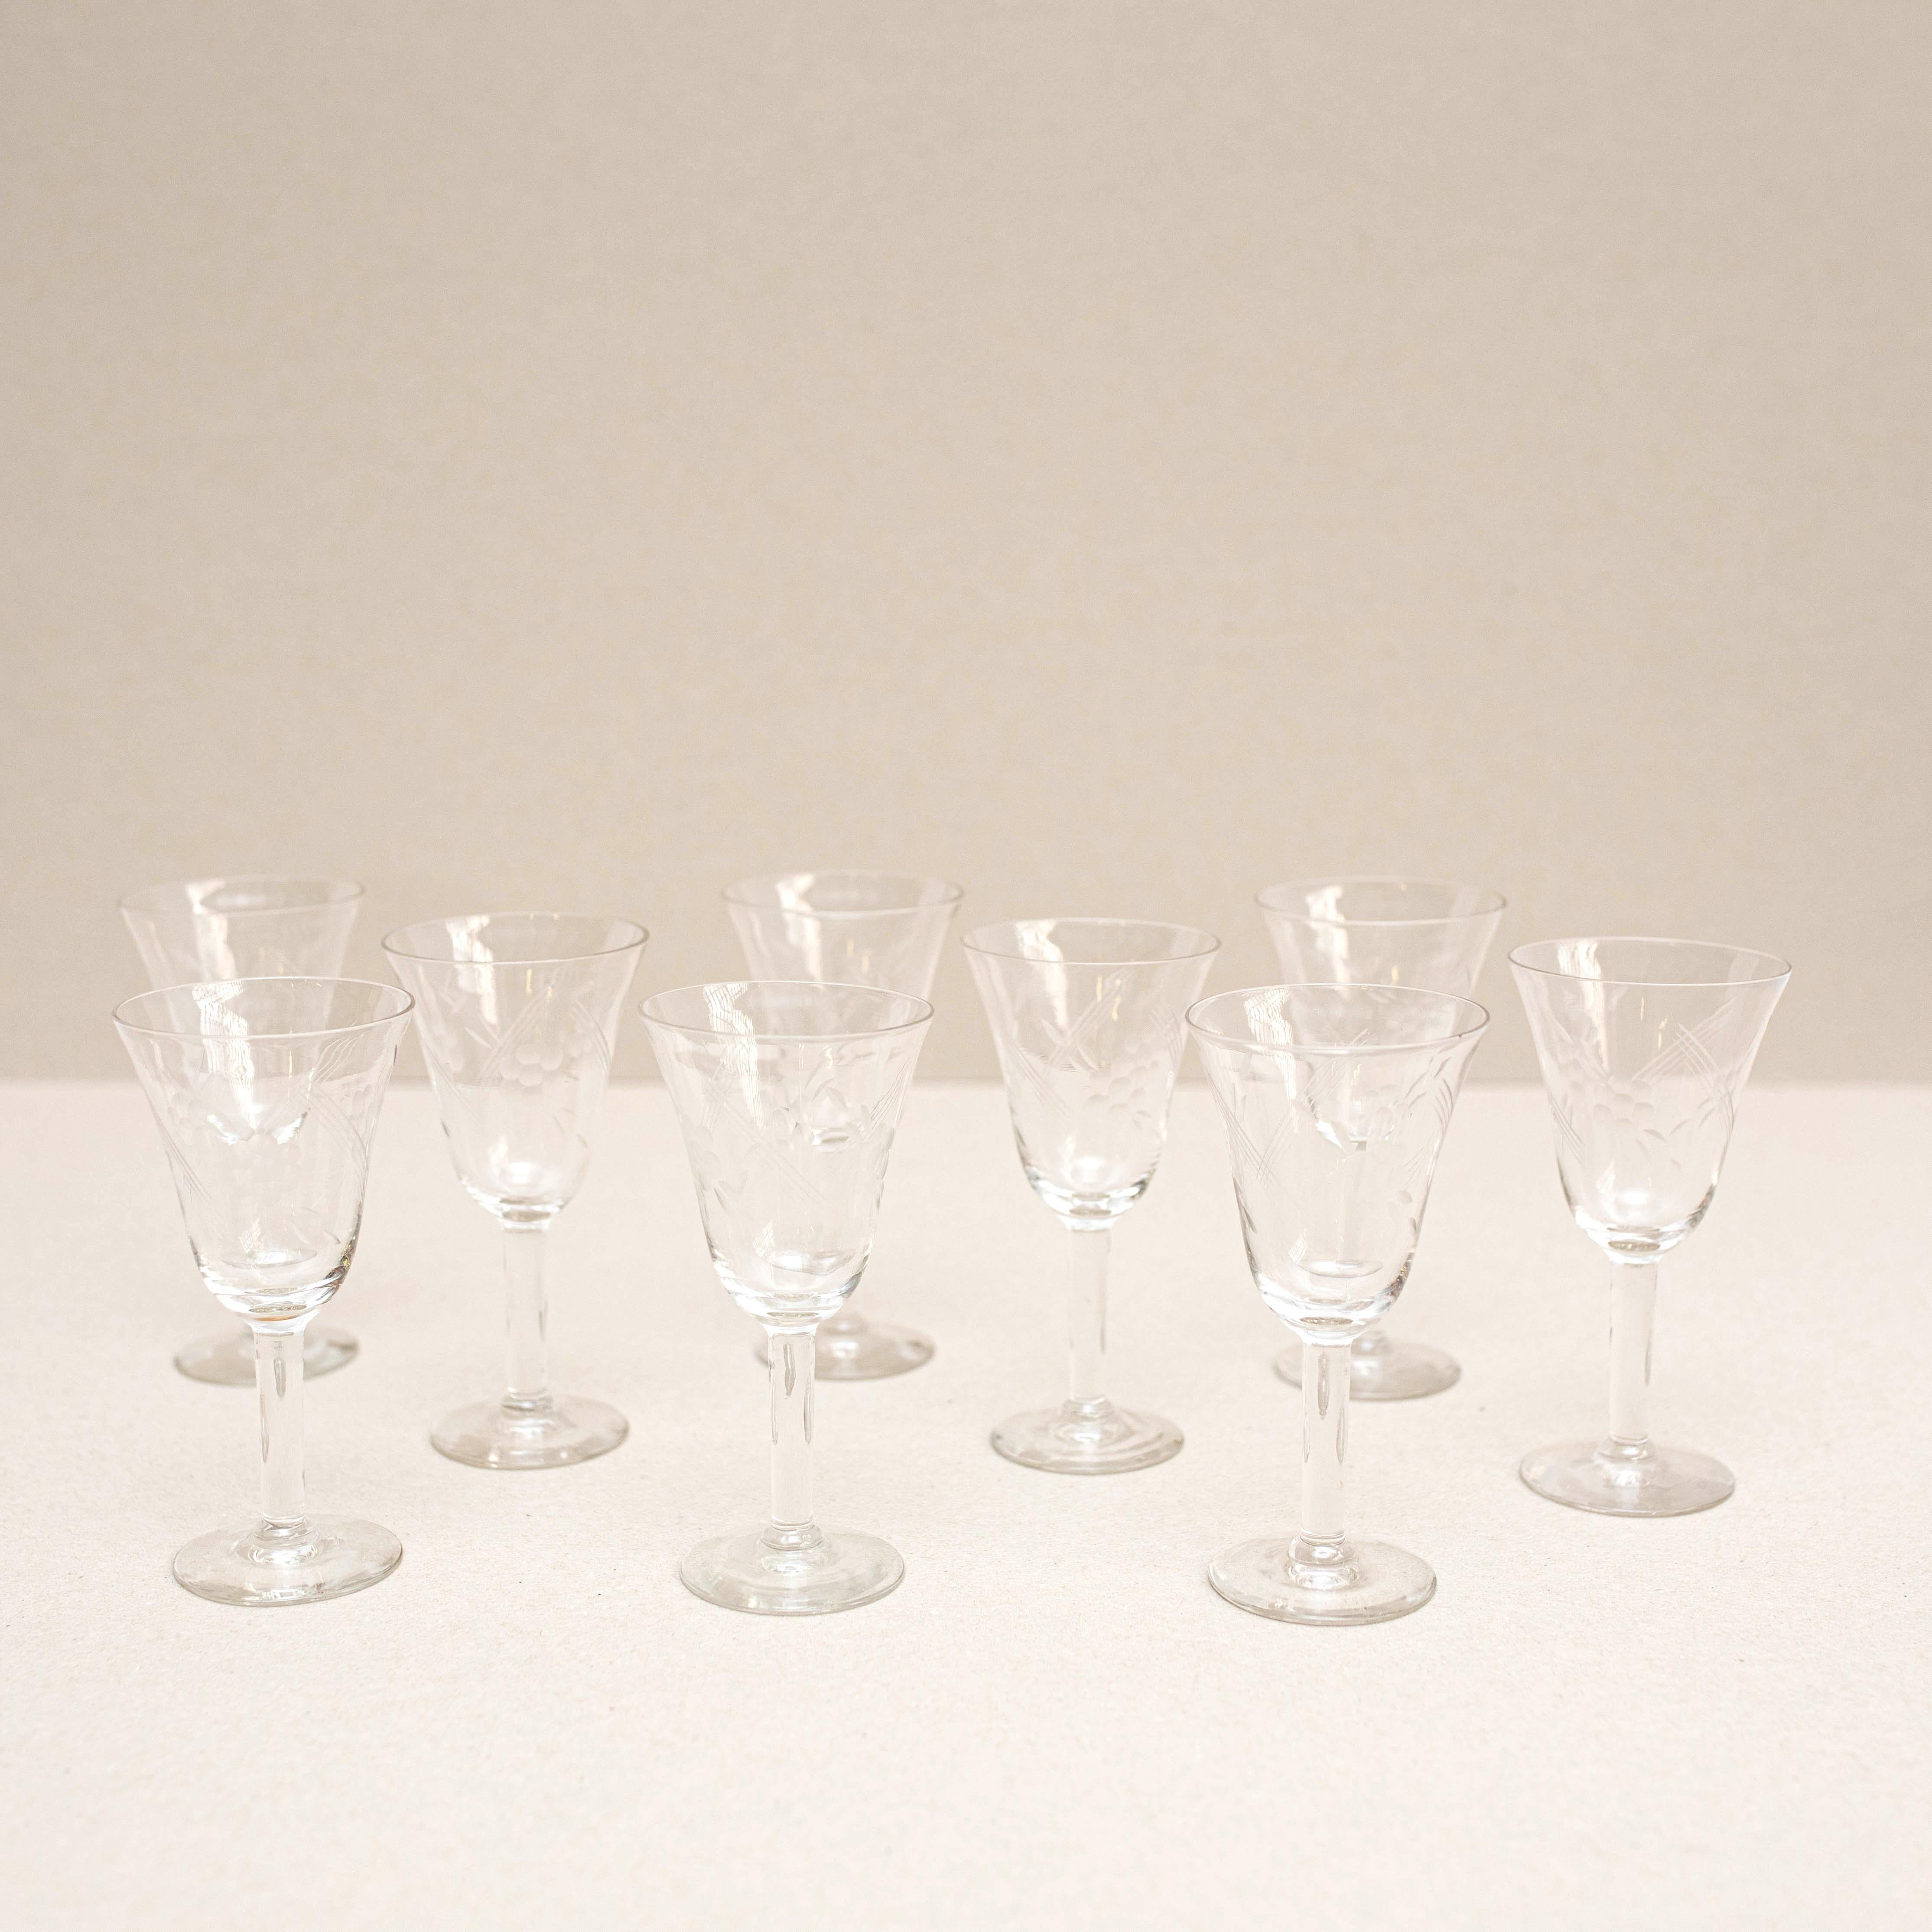 Set of 9 Antique glass wine cups.

Made by unknown manufacturer in Spain, circa 1970.

In original condition, with minor wear consistent with age and use, preserving a beautiful patina.

Materials:
Glass

Dimensions:
H 18 cm 
W 7 cm 
D